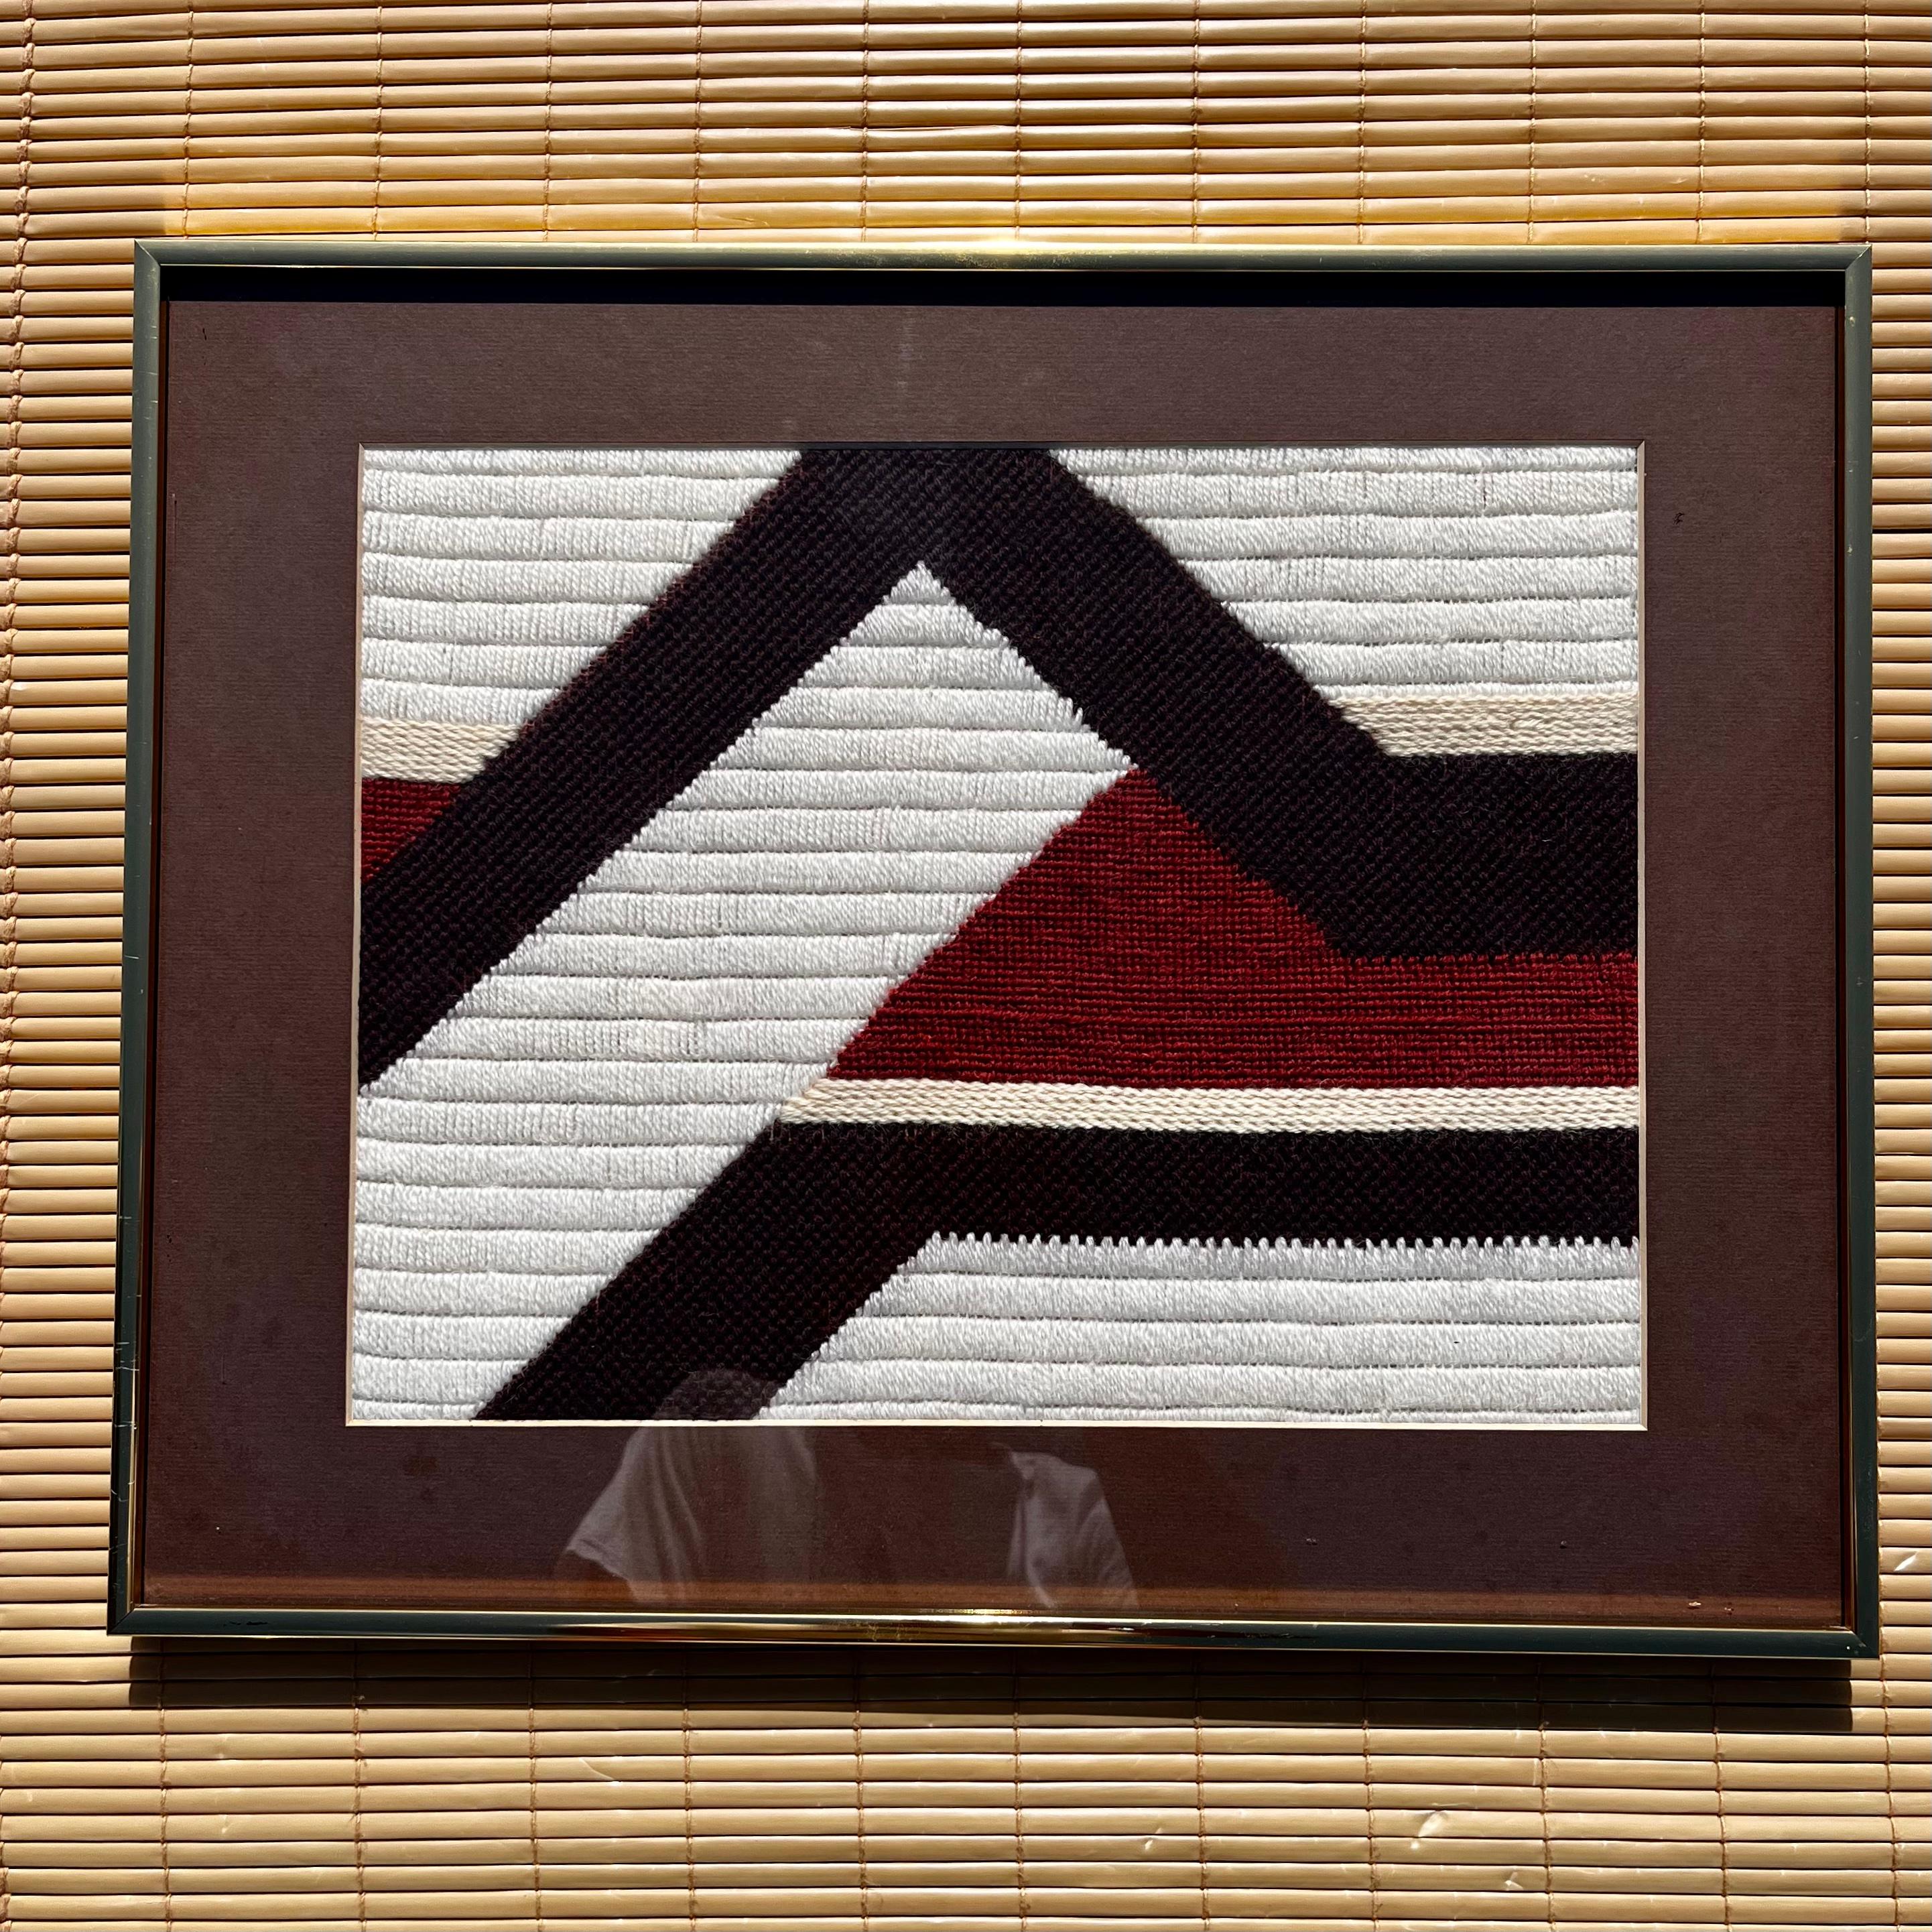 Vintage Medium Size Mid Century Modern Woven Textile Framed Abstract / Folk Wall Art. Circa 1970s
Features a handwoven abstract geometric pattern in a earth tones color palette, matted and framed with a golden anodized aluminum frame. 
In